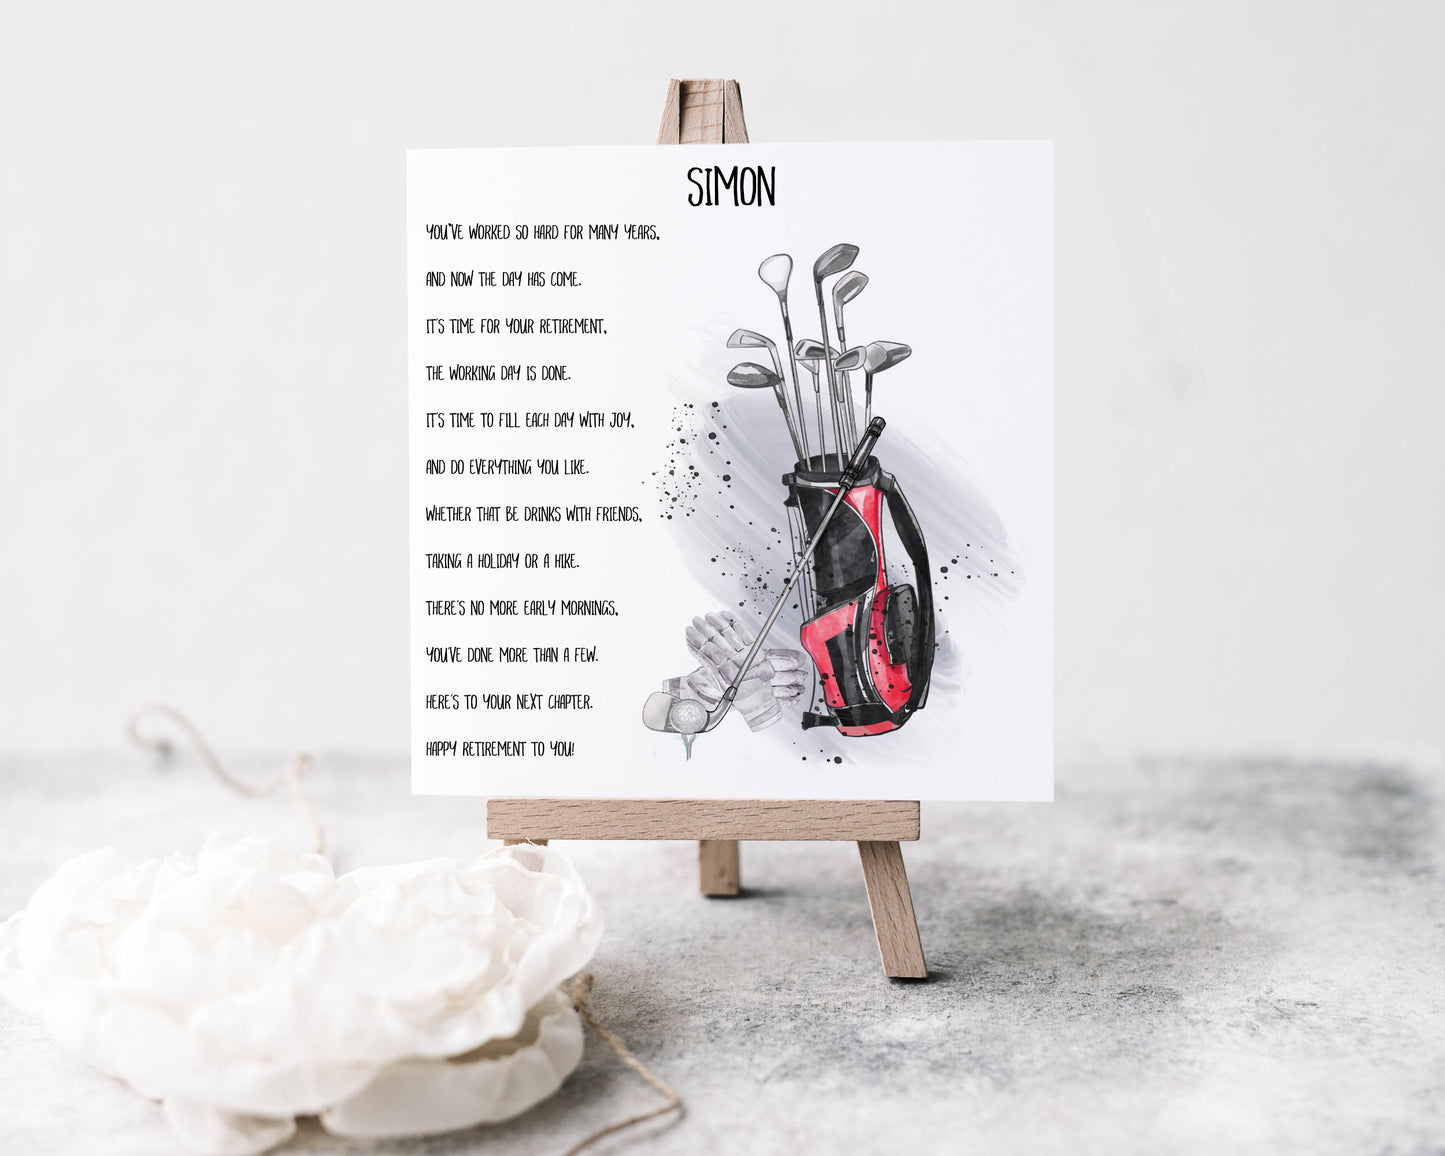 Square retirement greeting card that can be personalised featuring a watercolour design of a golf bag and clubs with a retirement poem.